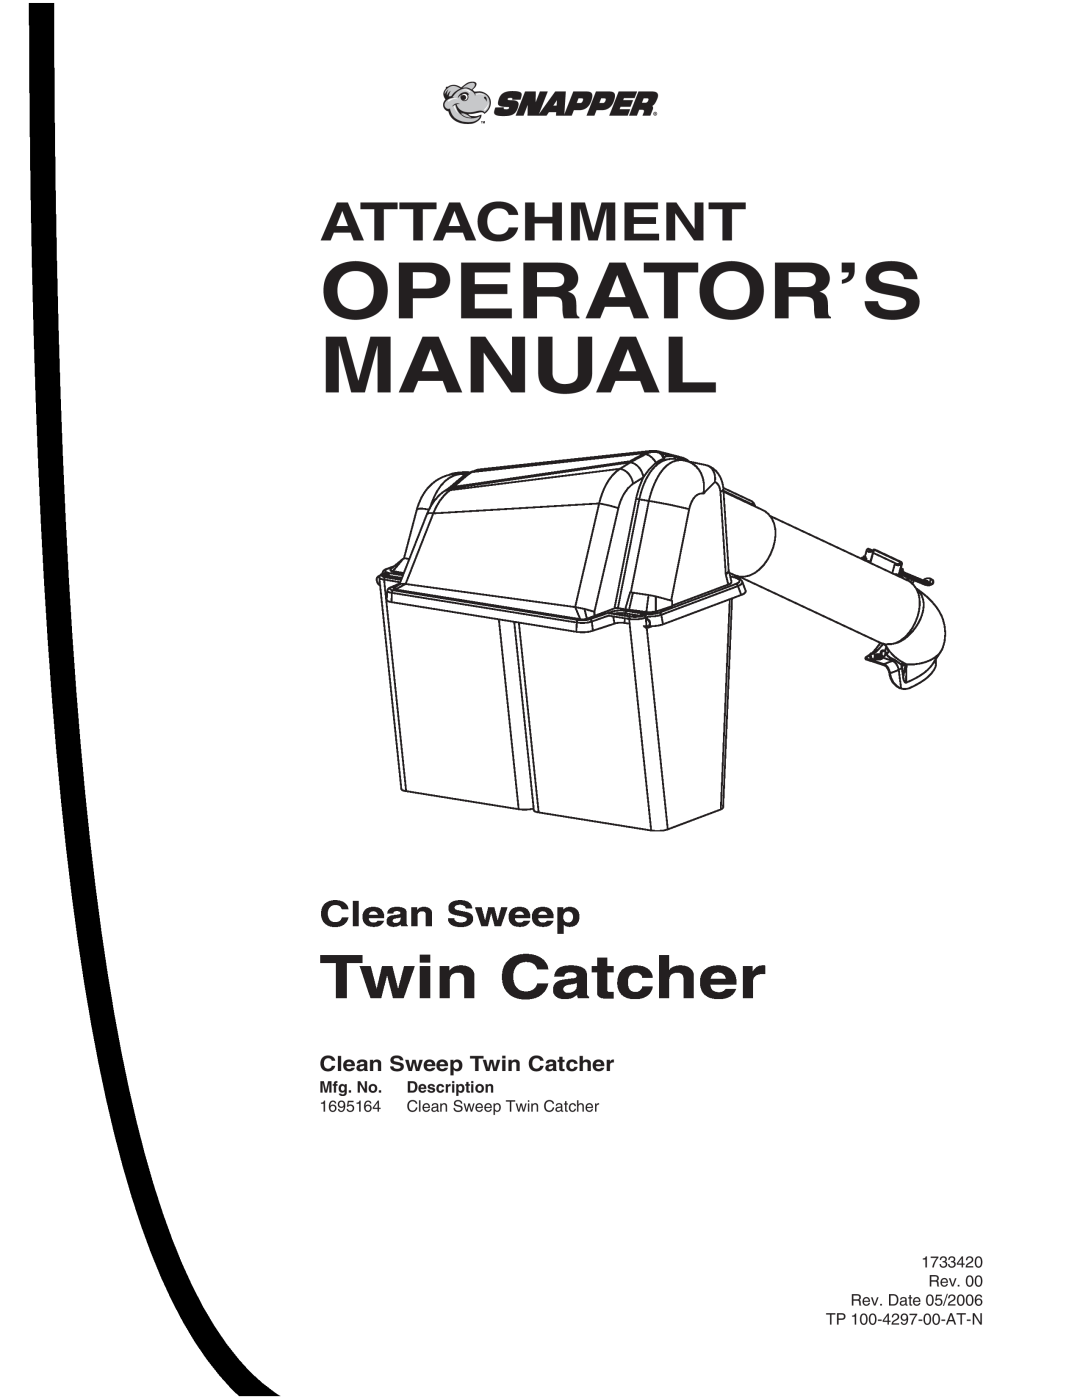 Snapper 1695164 manual Clean Sweep Twin Catcher, Operator’S Manual, Attachment, Mfg. No. Description, TP 100-4297-00-AT-N 